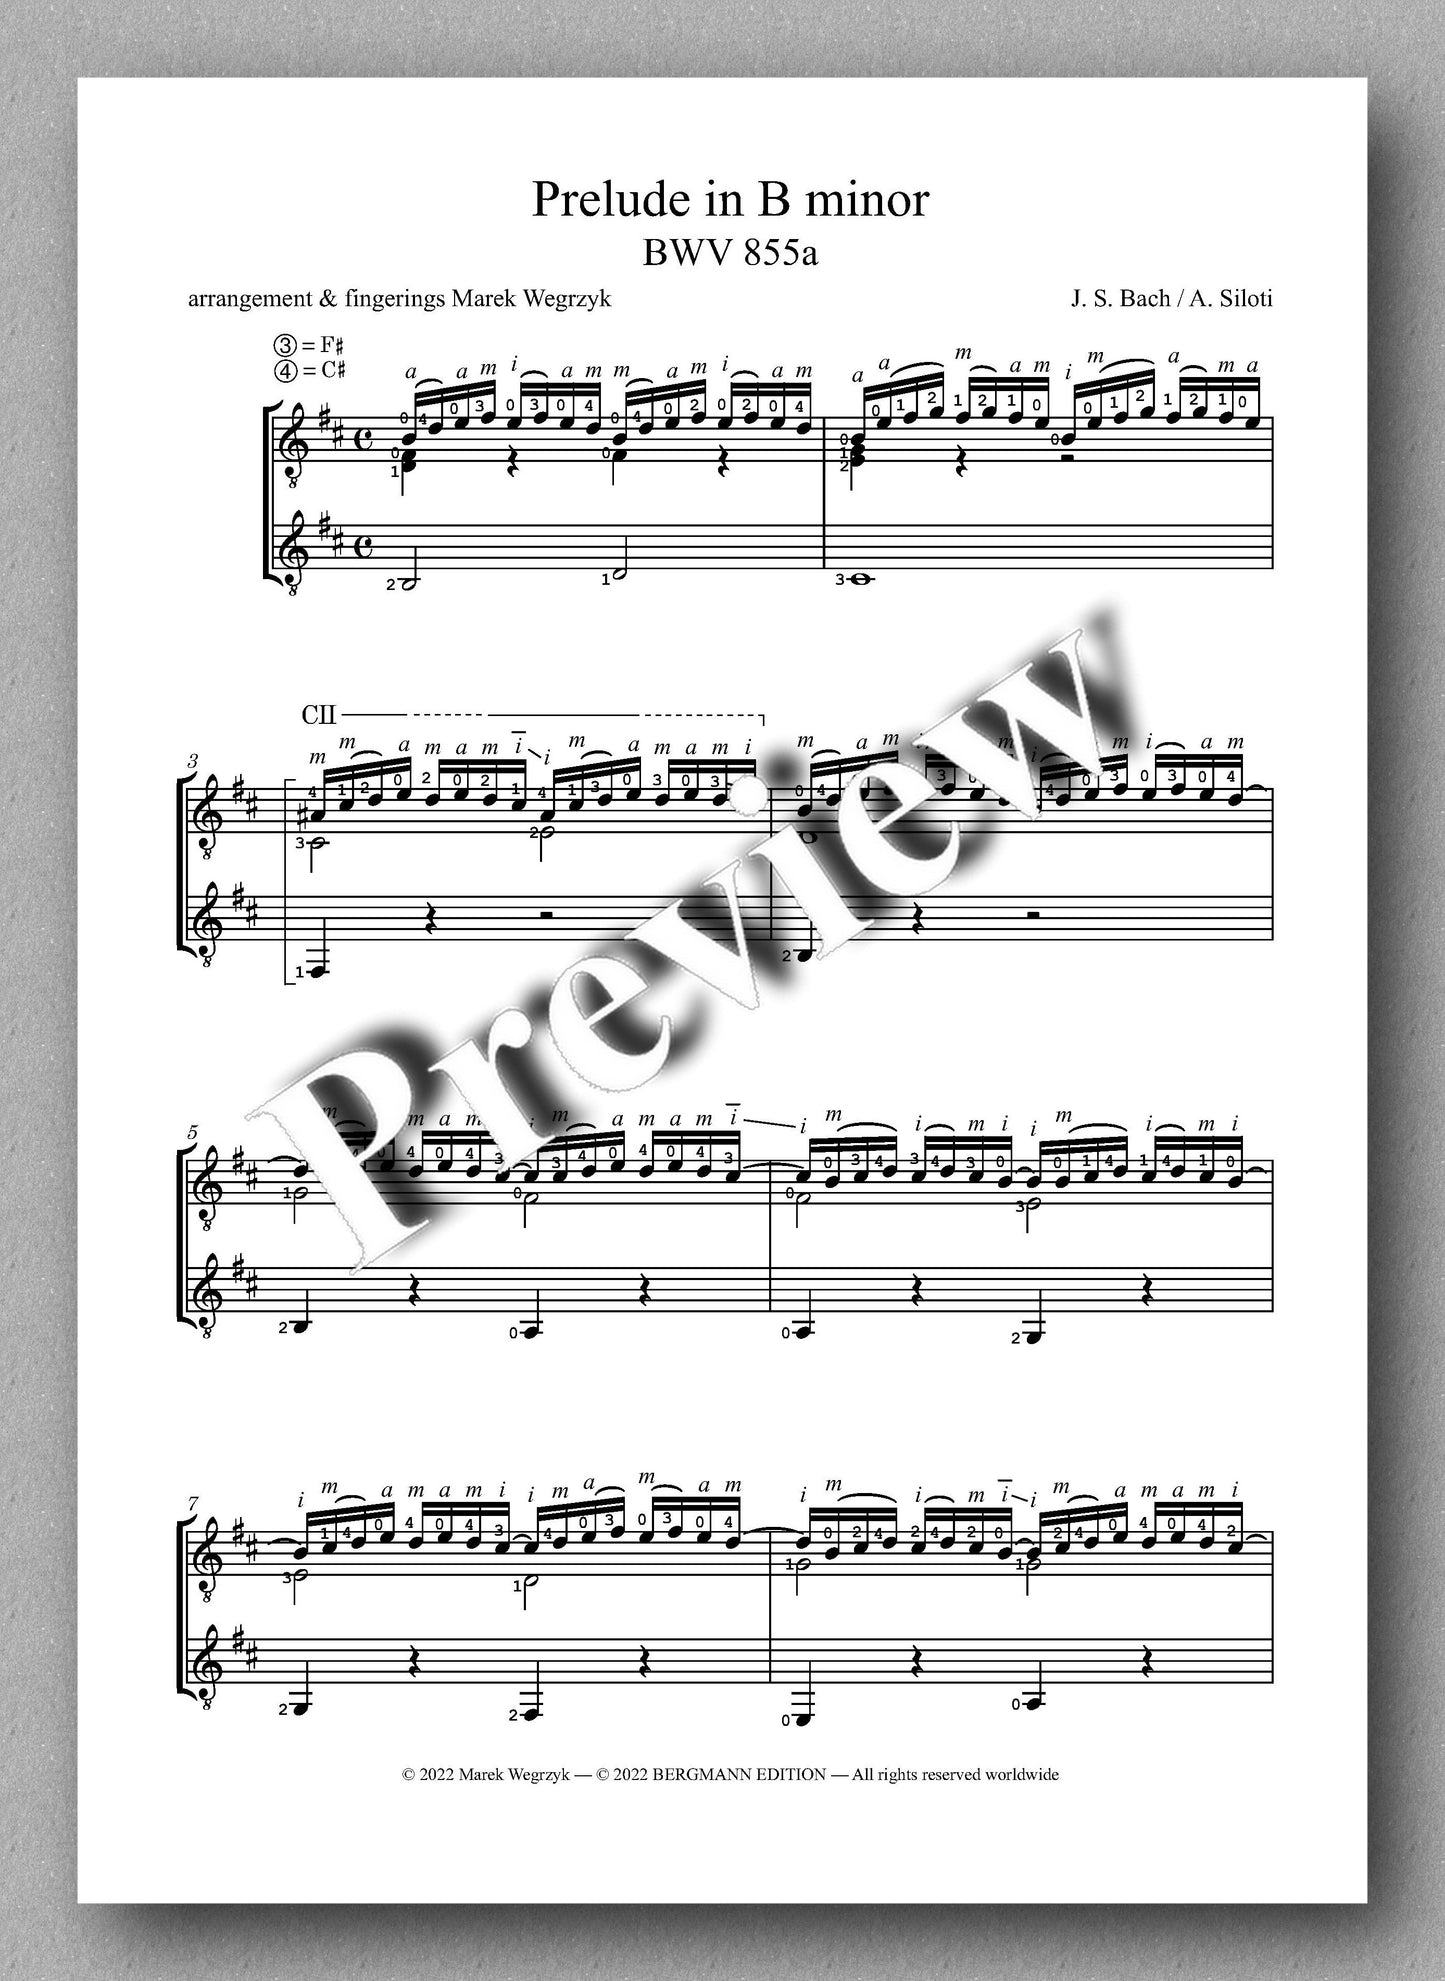 Bach-Wegrzyg, Prelude in B minor, BWV 855a - preview of the music score 